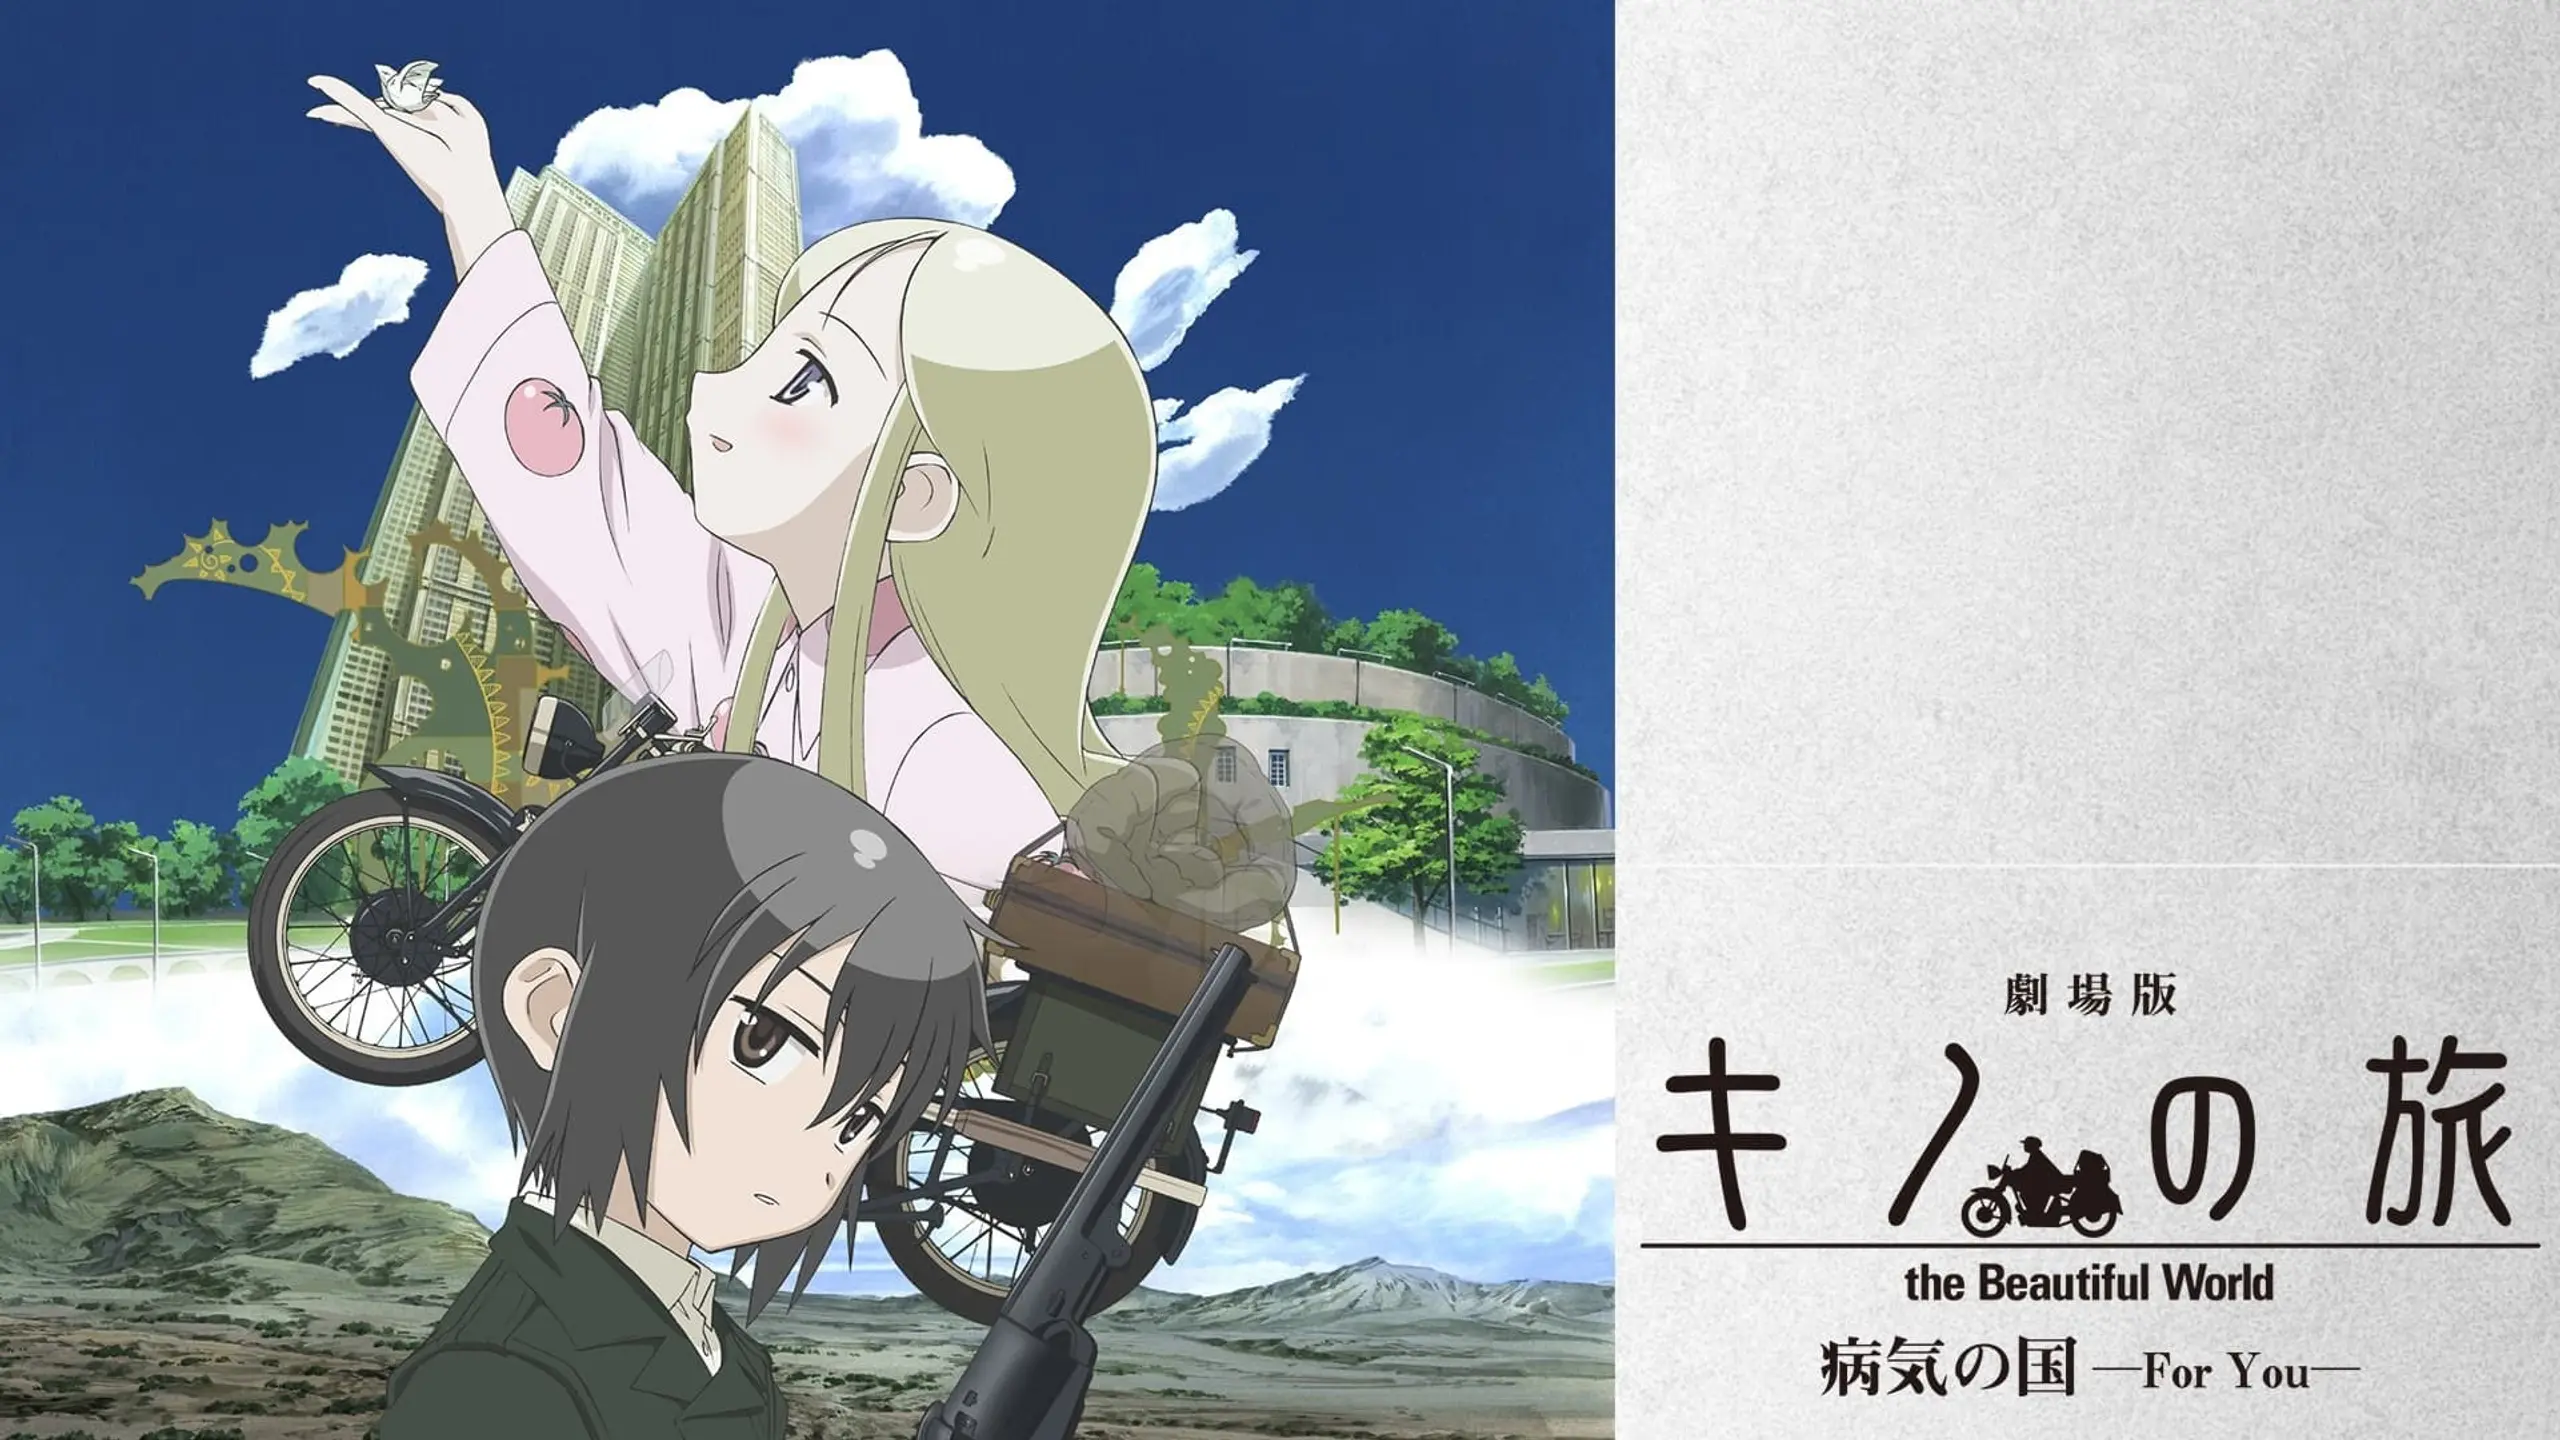 Kino’s Journey - The Beautiful World - Country of Illness - For You